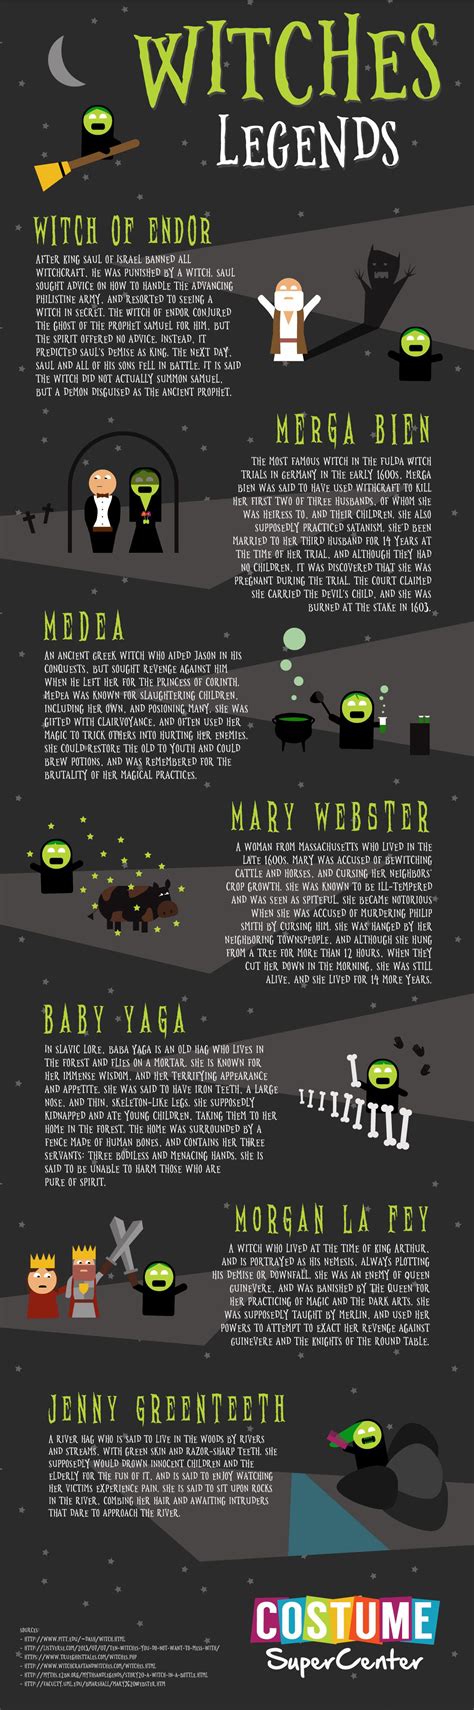 The miniature witch infographics